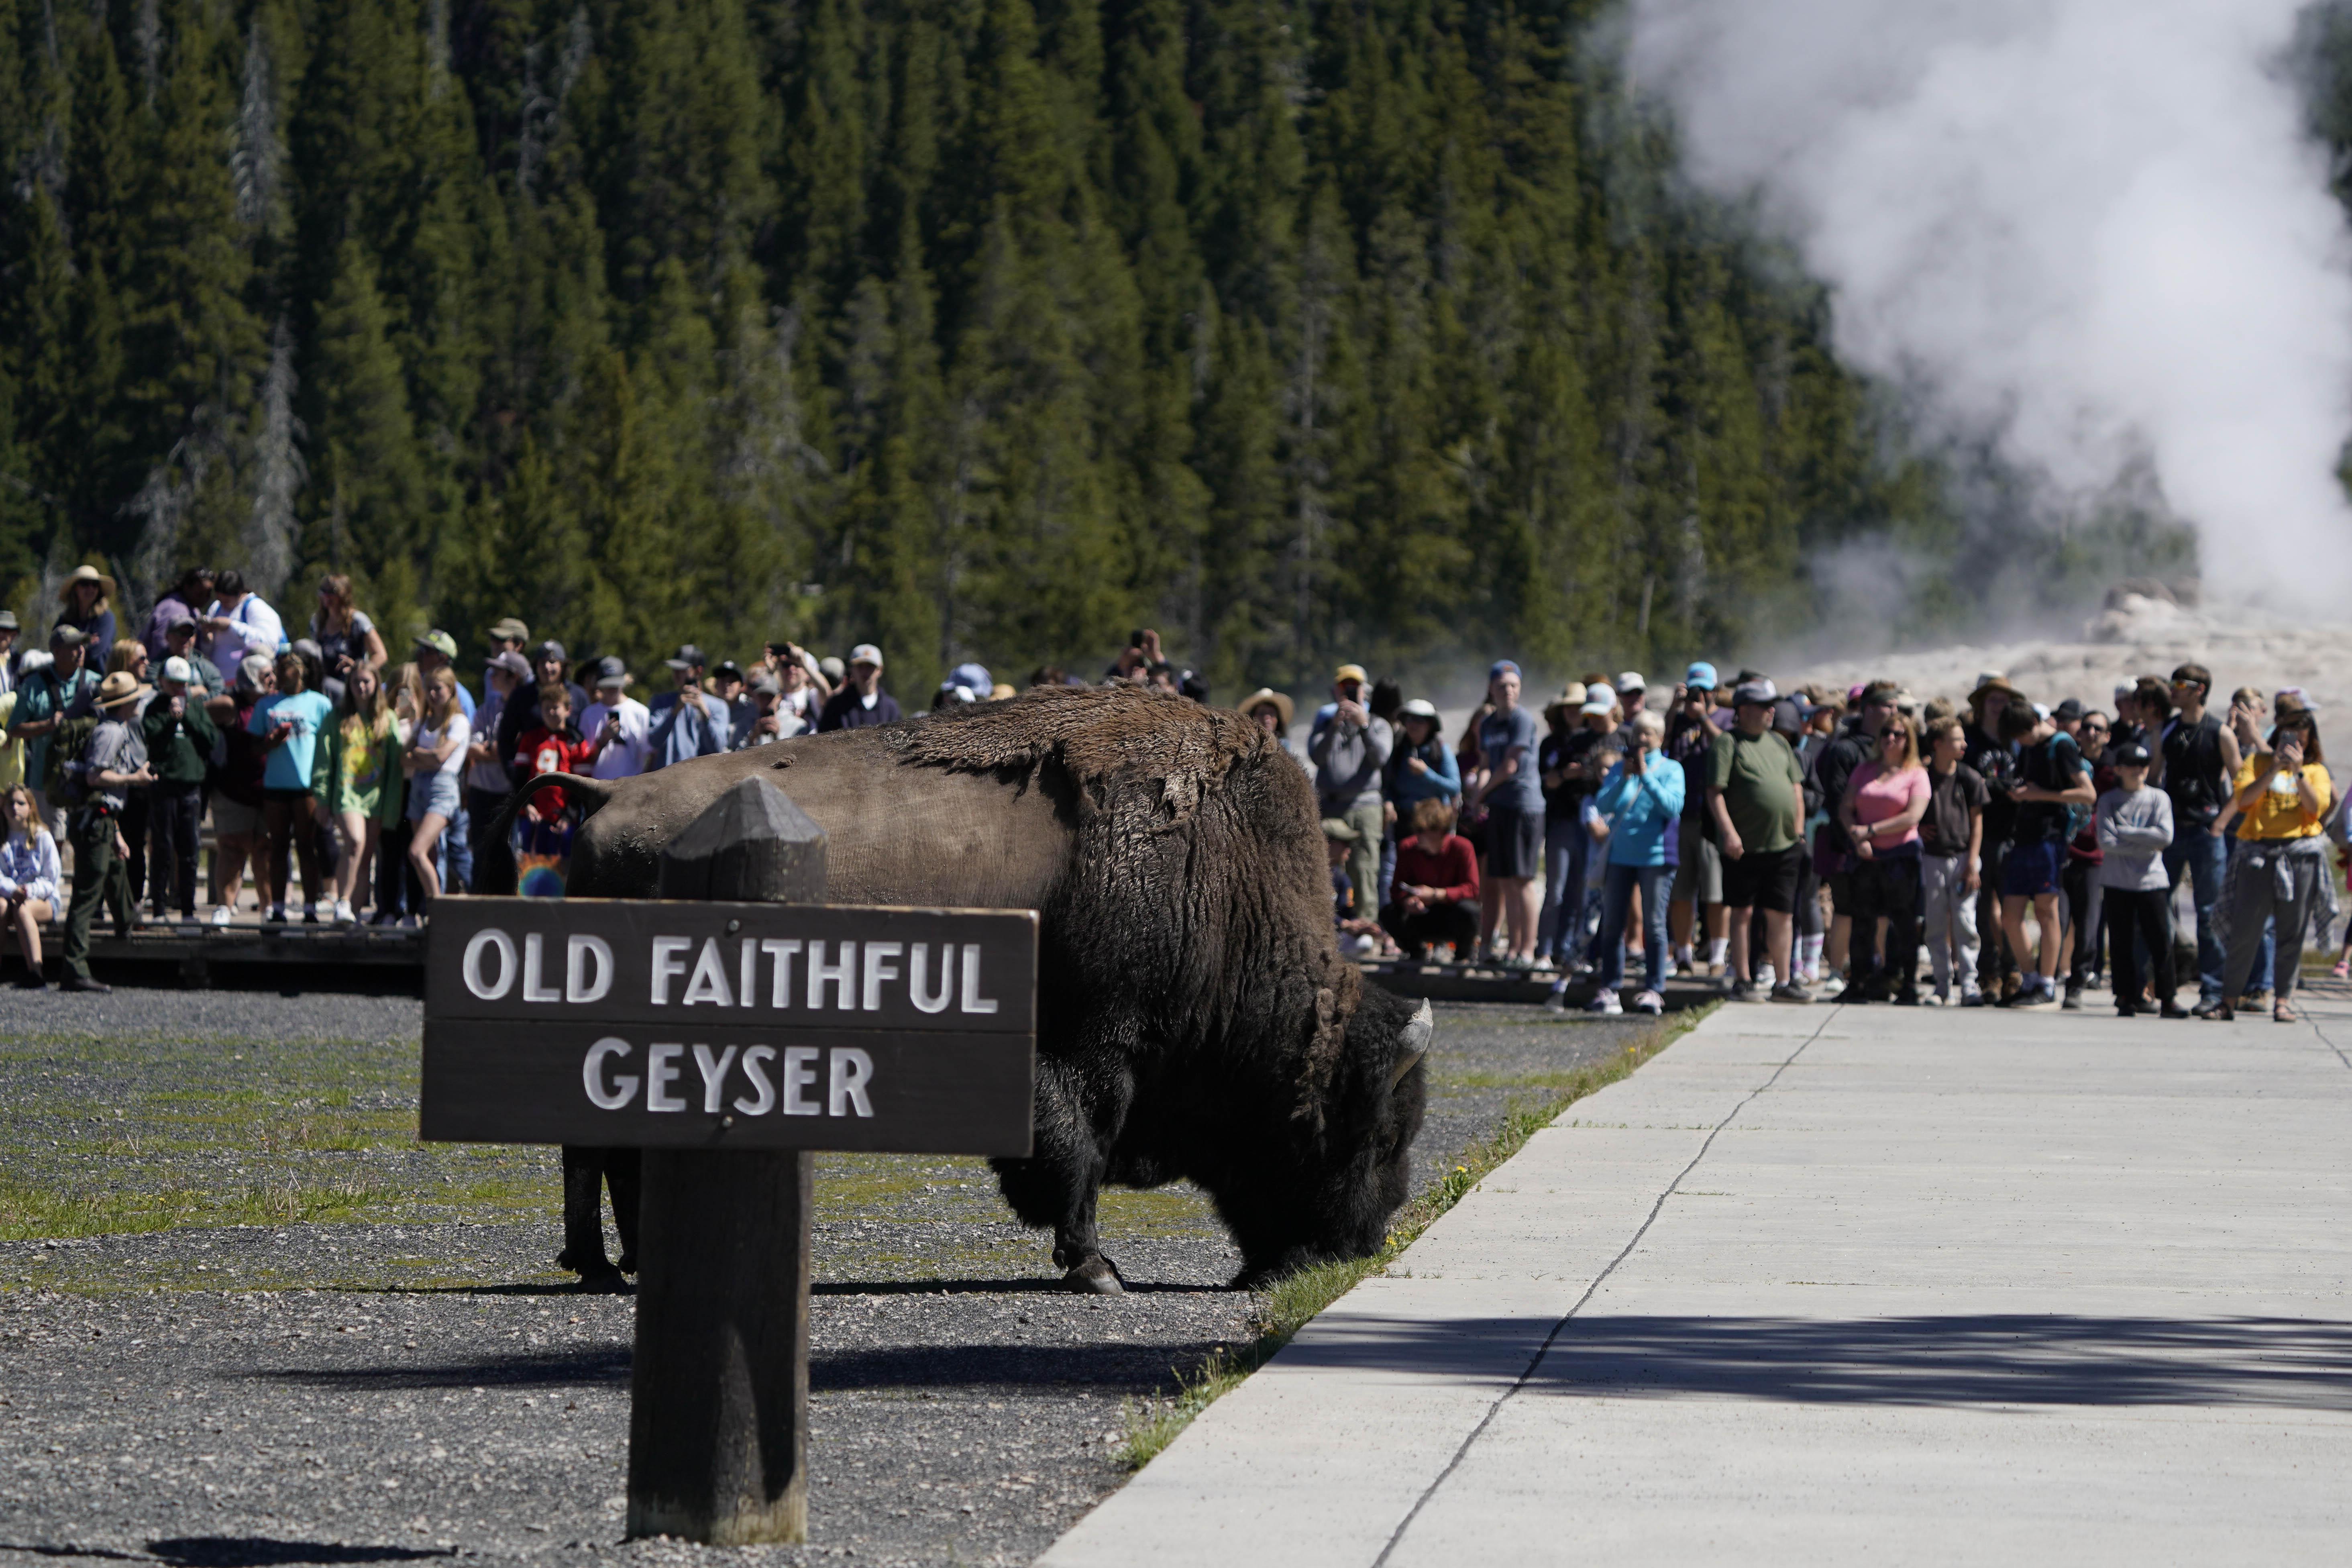 A bison grazes between a sign that says "Old Faithful Geyser" and a large crowd of people; there is some mist coming from near the crowd.